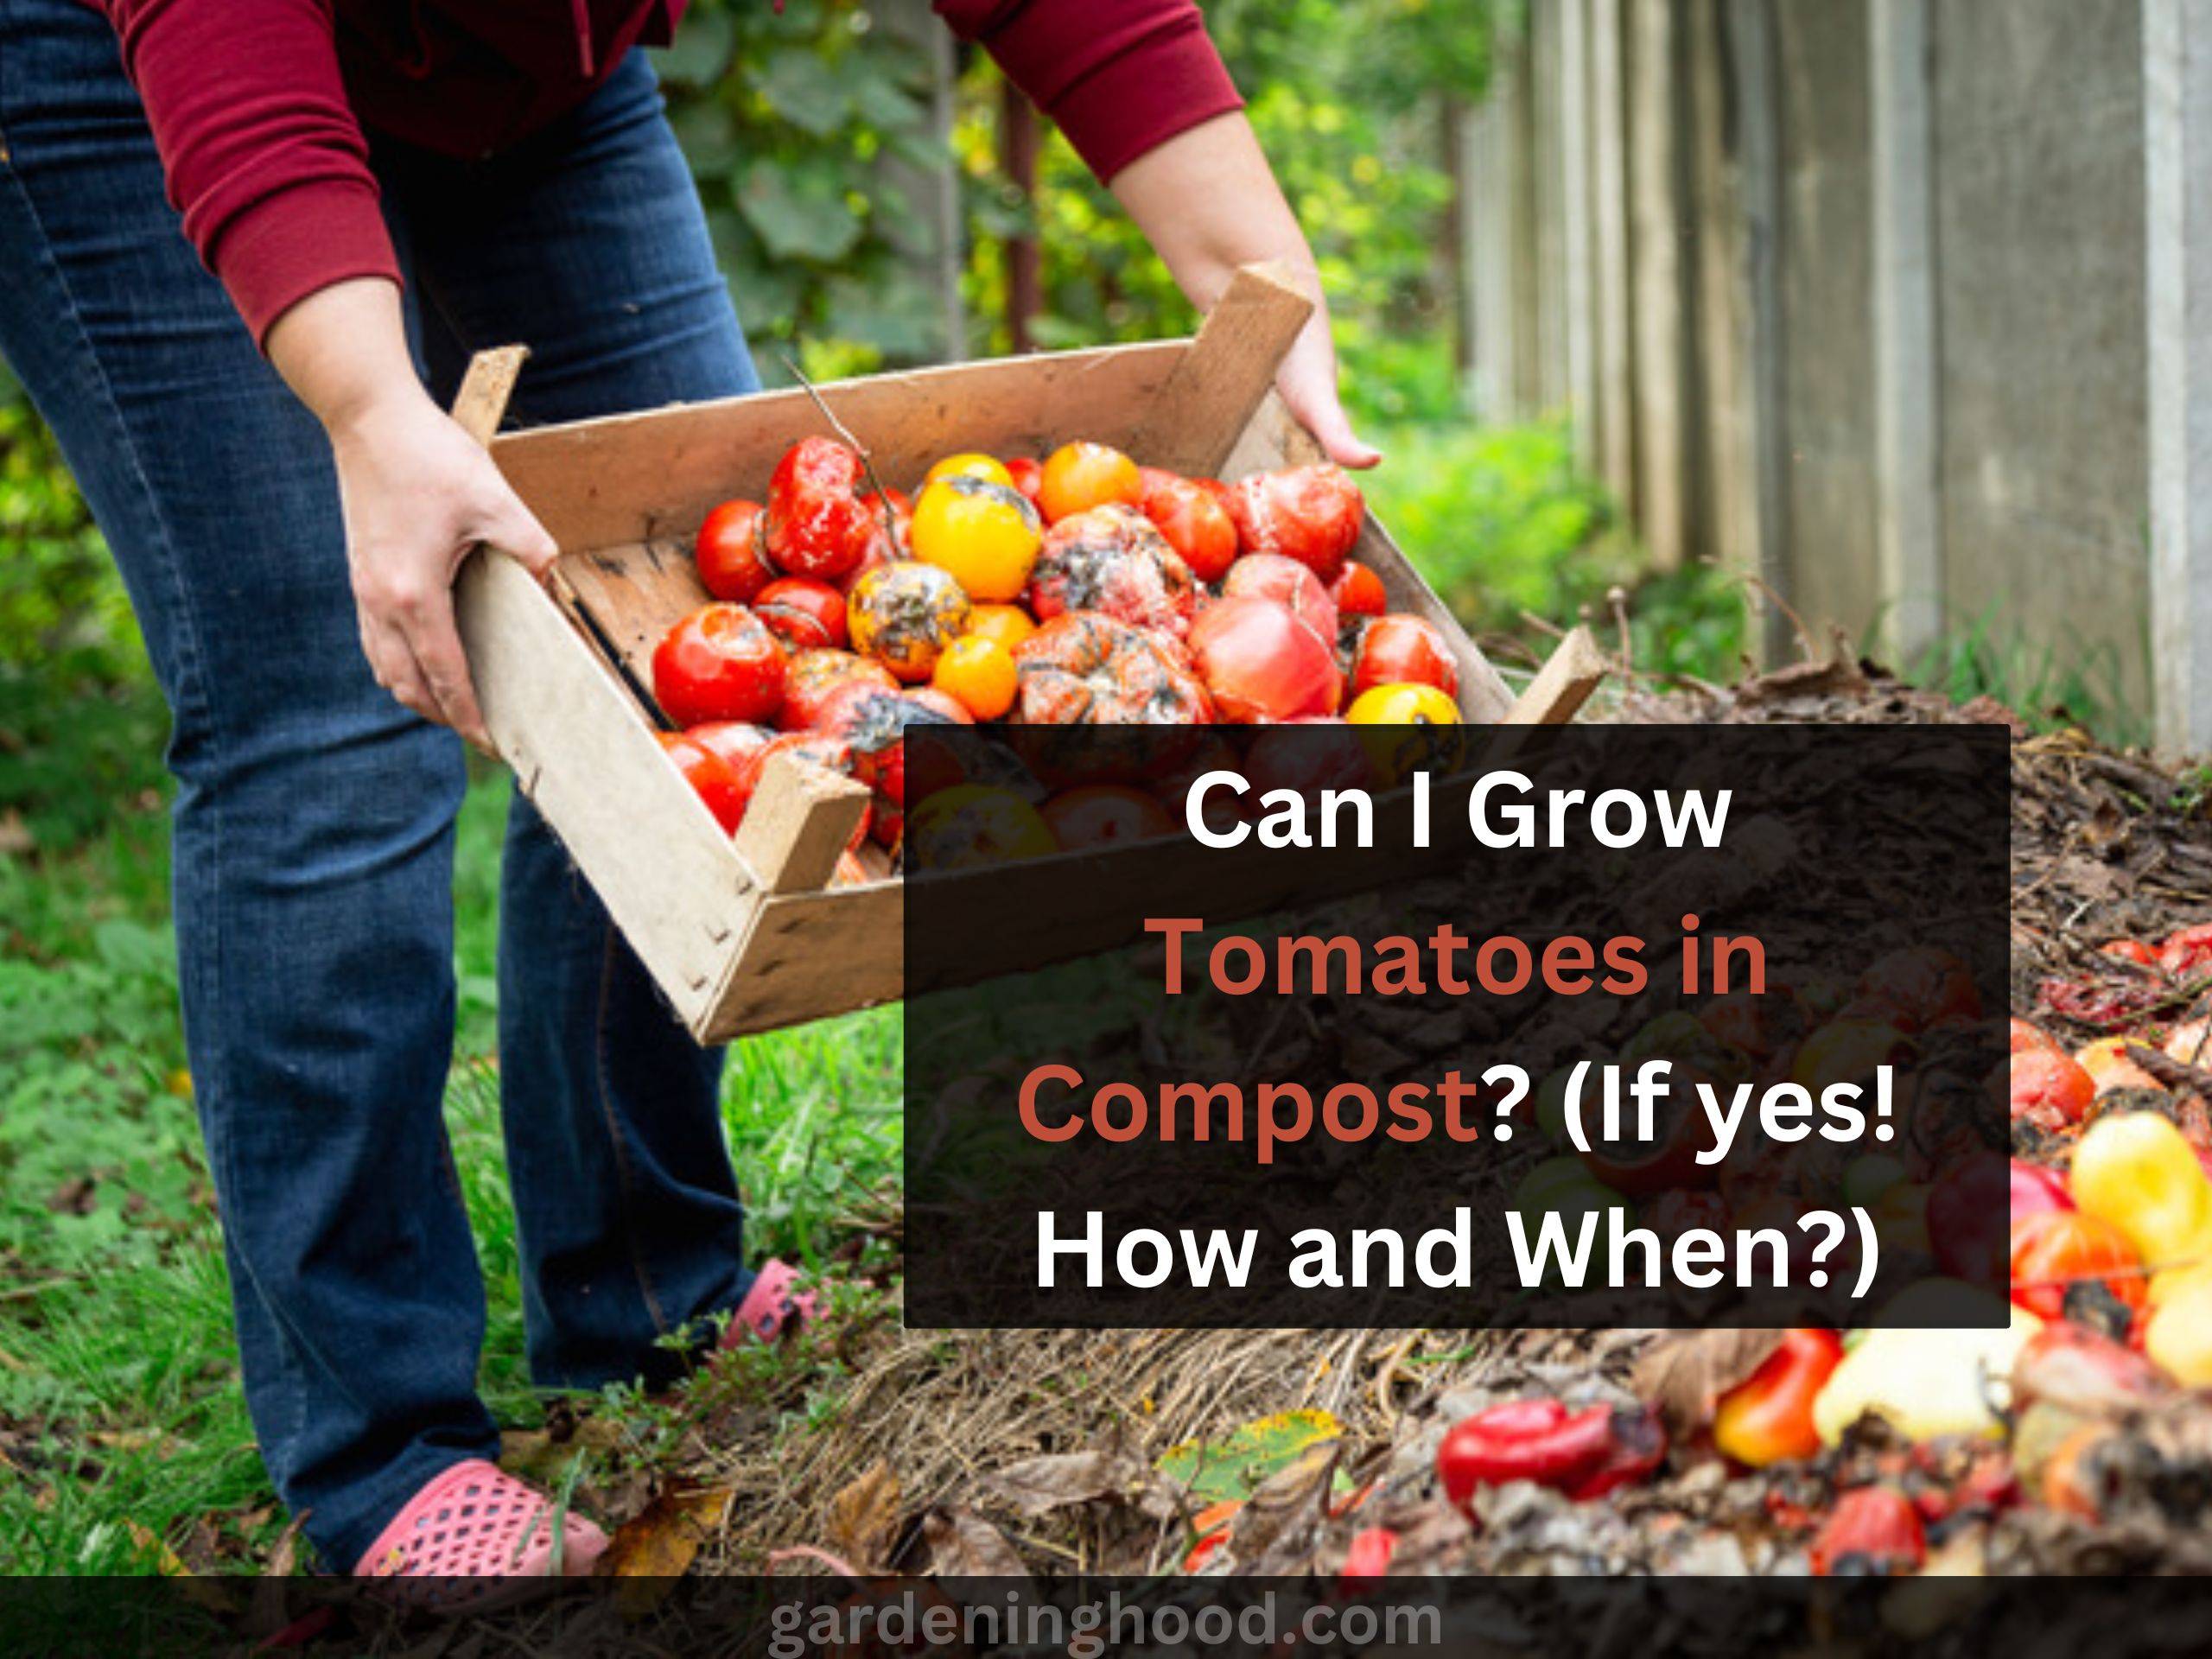 Can I Grow Tomatoes in Compost? (If yes! How and When?)